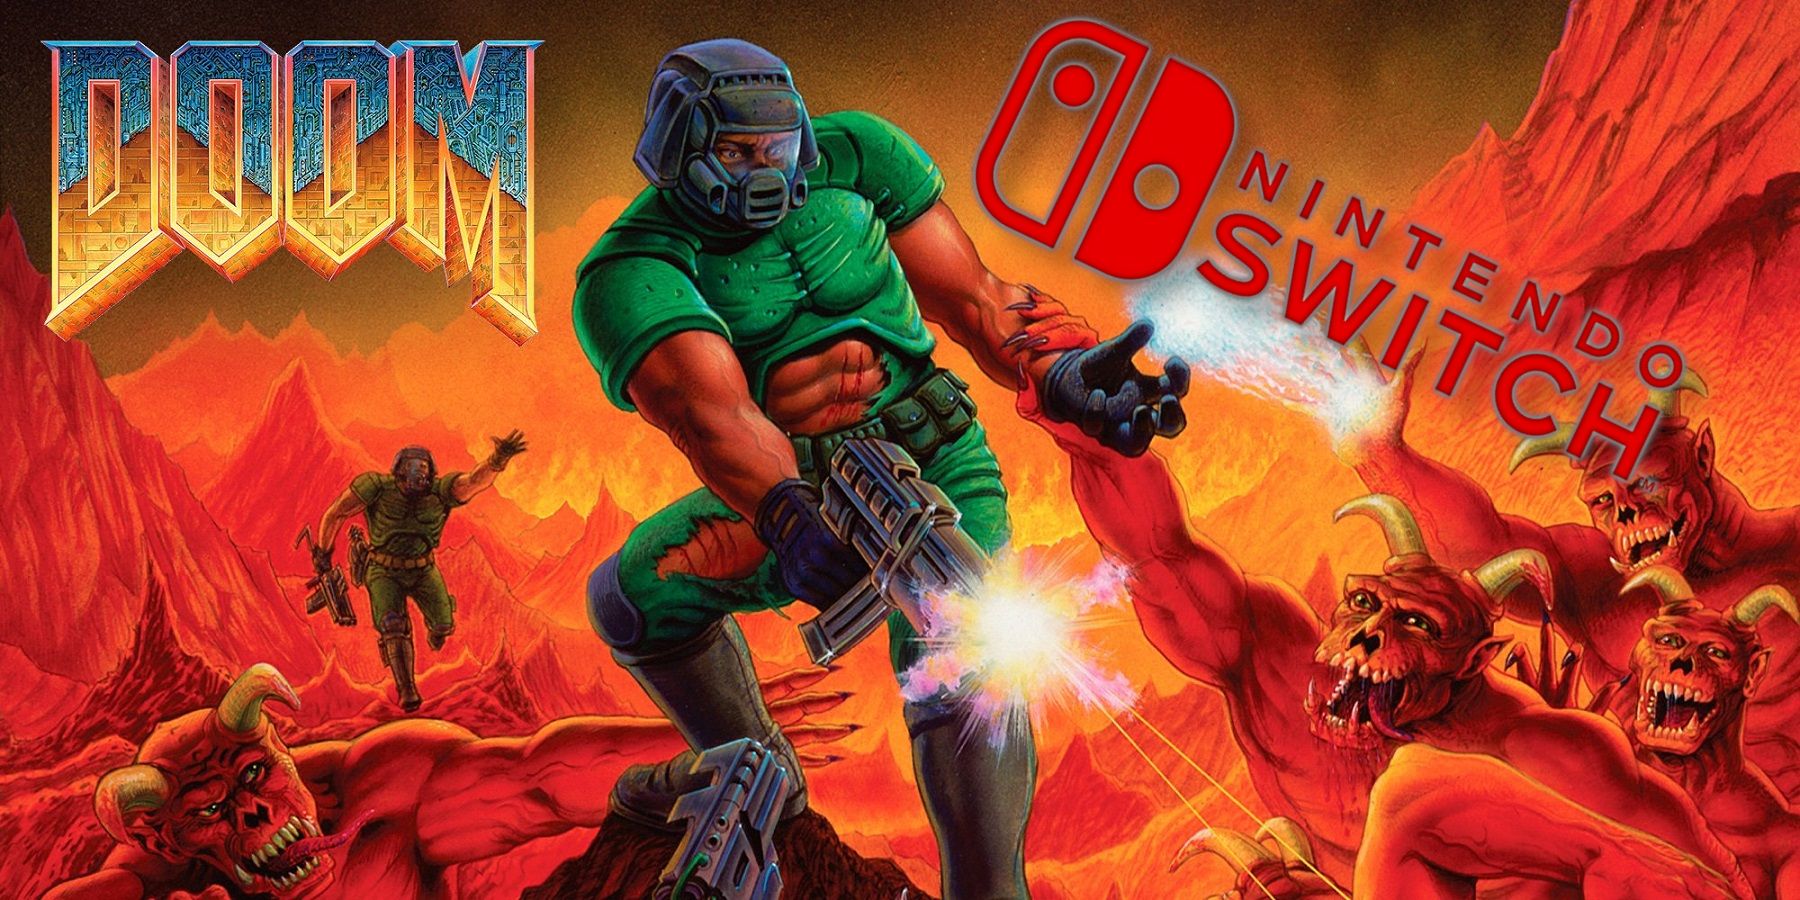 The artwork from Doom showing Doom Guy shooting monsters, with the Nintendo Switch logo in the top corner.